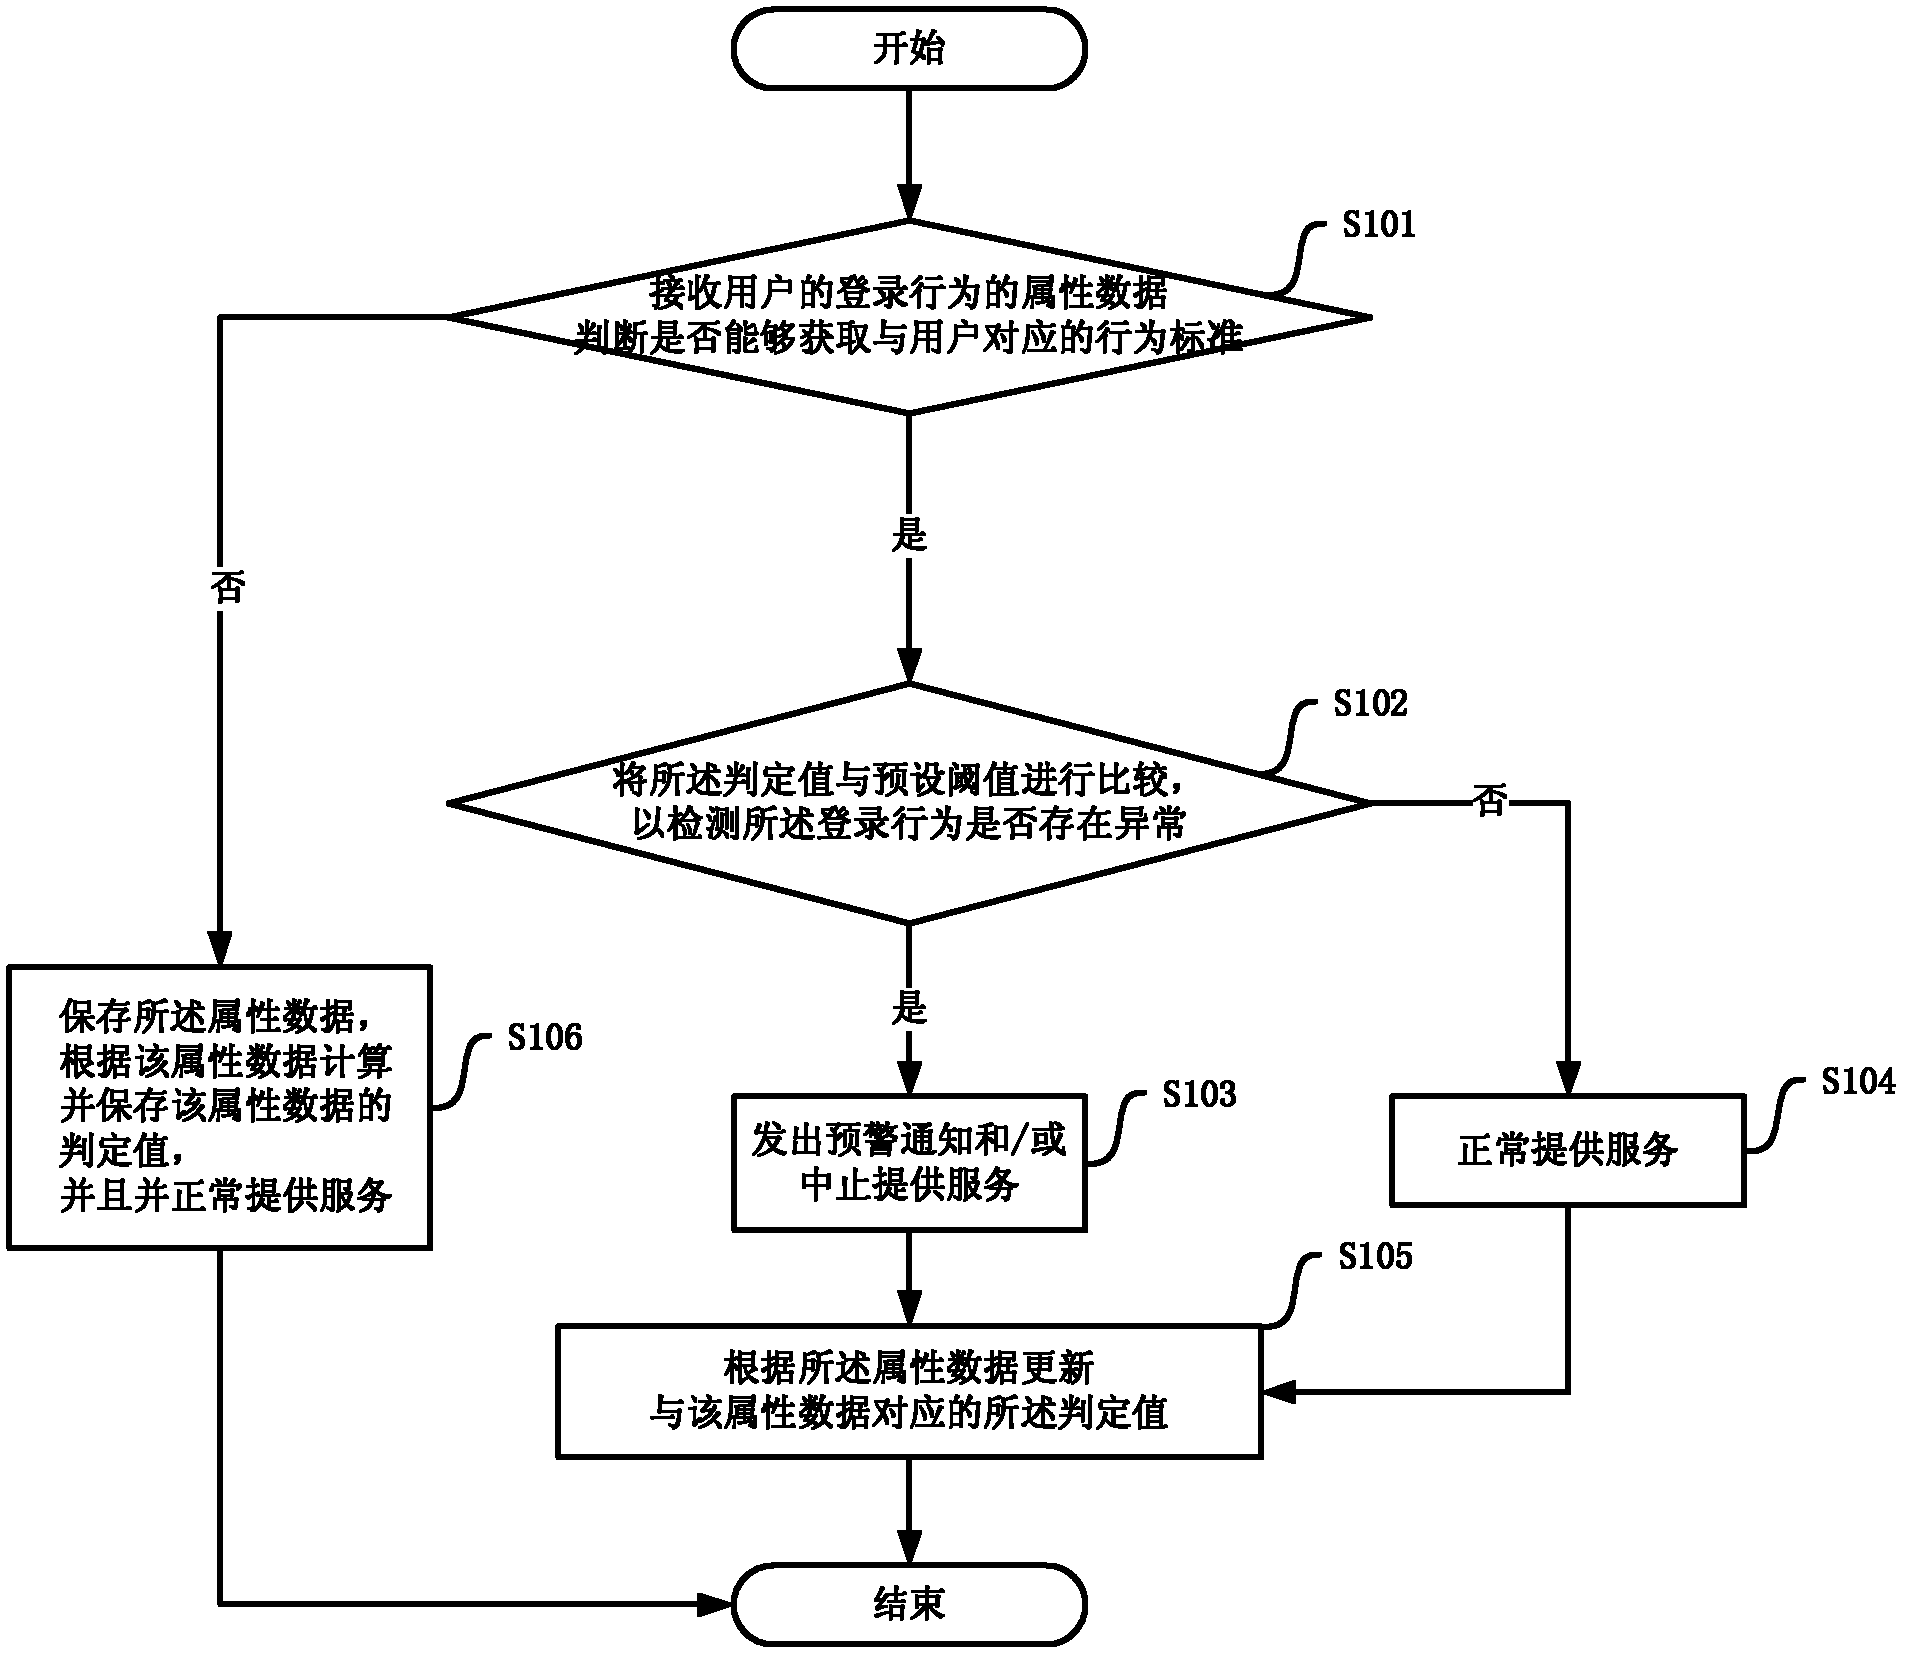 Abnormal login detecting method and device